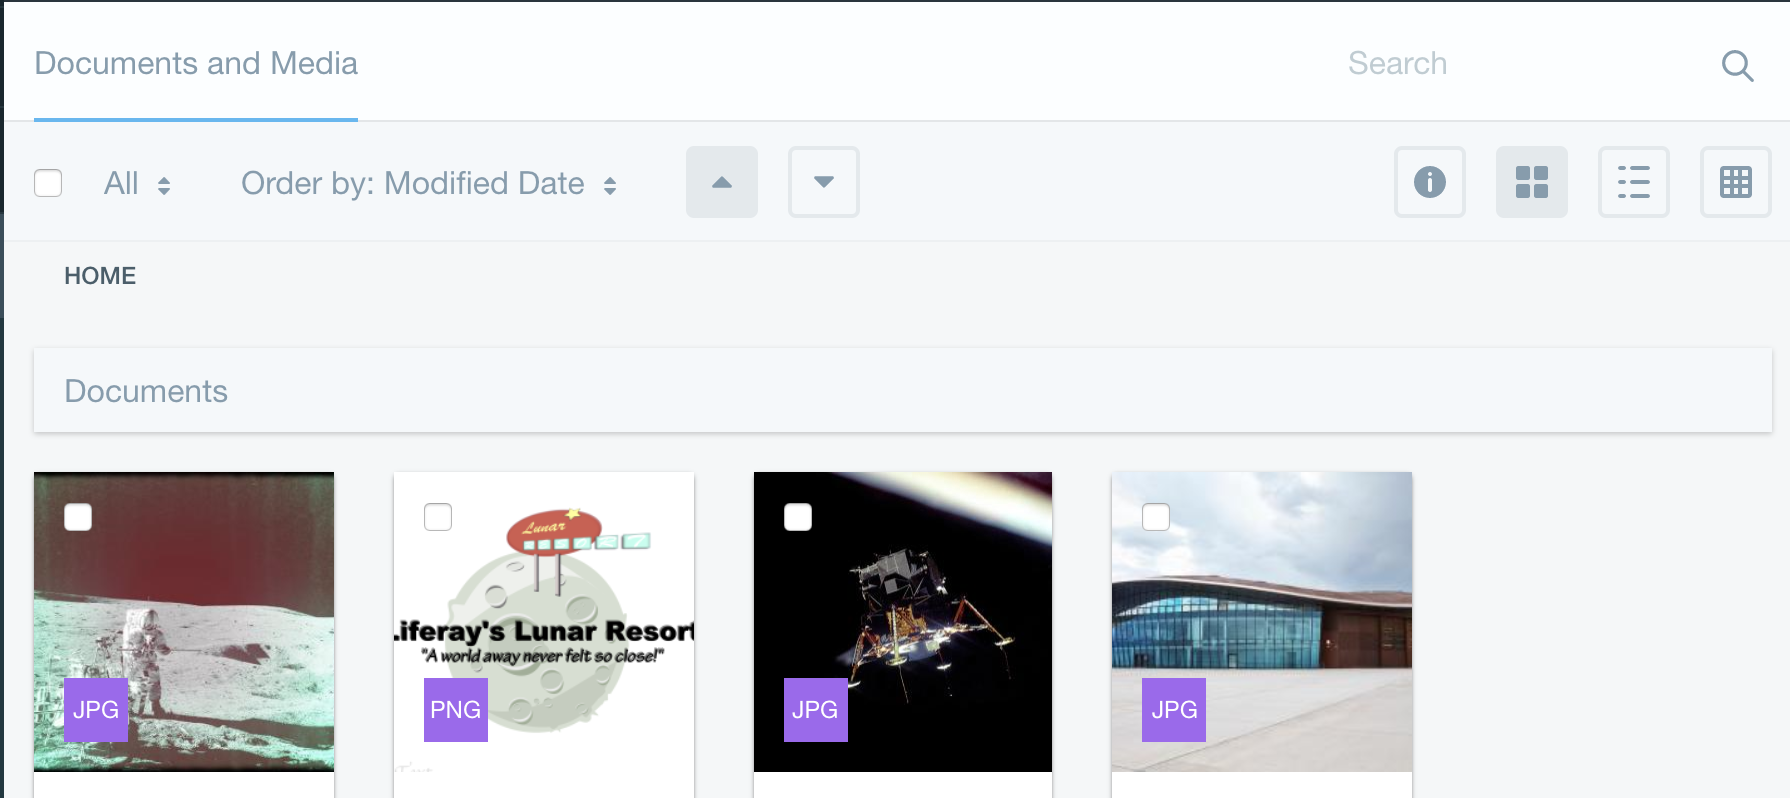 Figure 1: The Documents and Media librarys Home folder contains the Lunar Resorts existing images.